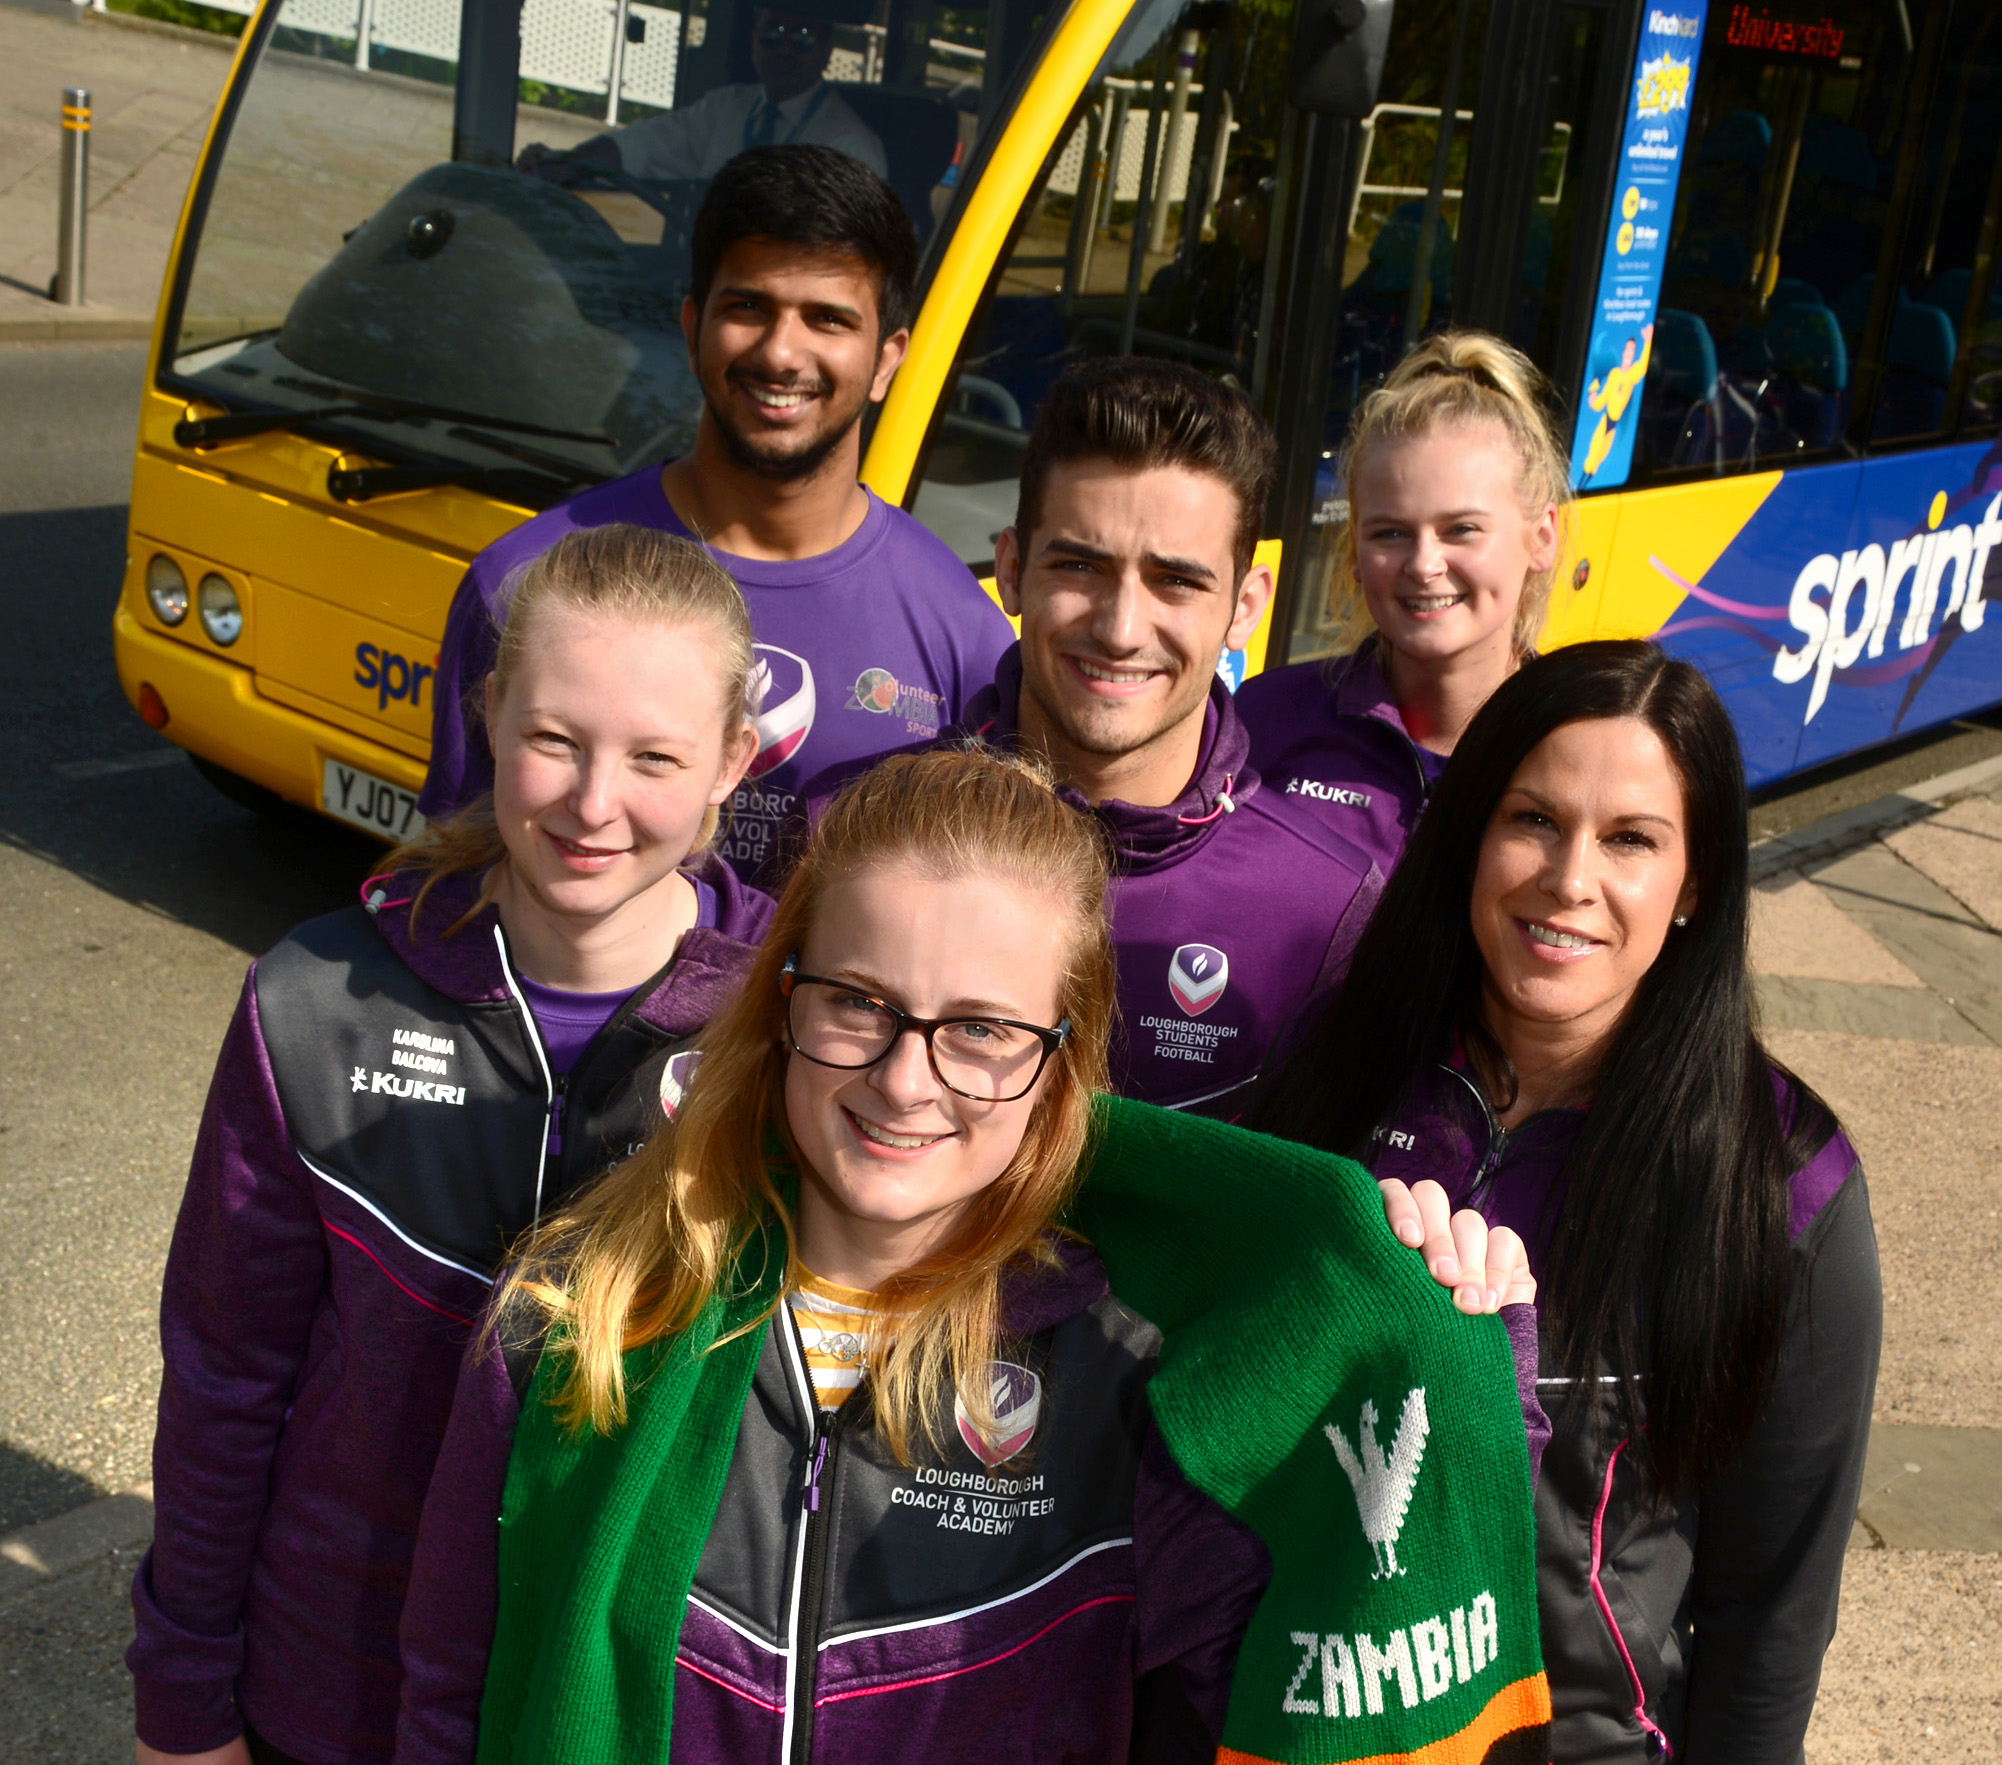 Kinchbus sprints to support Zambia students